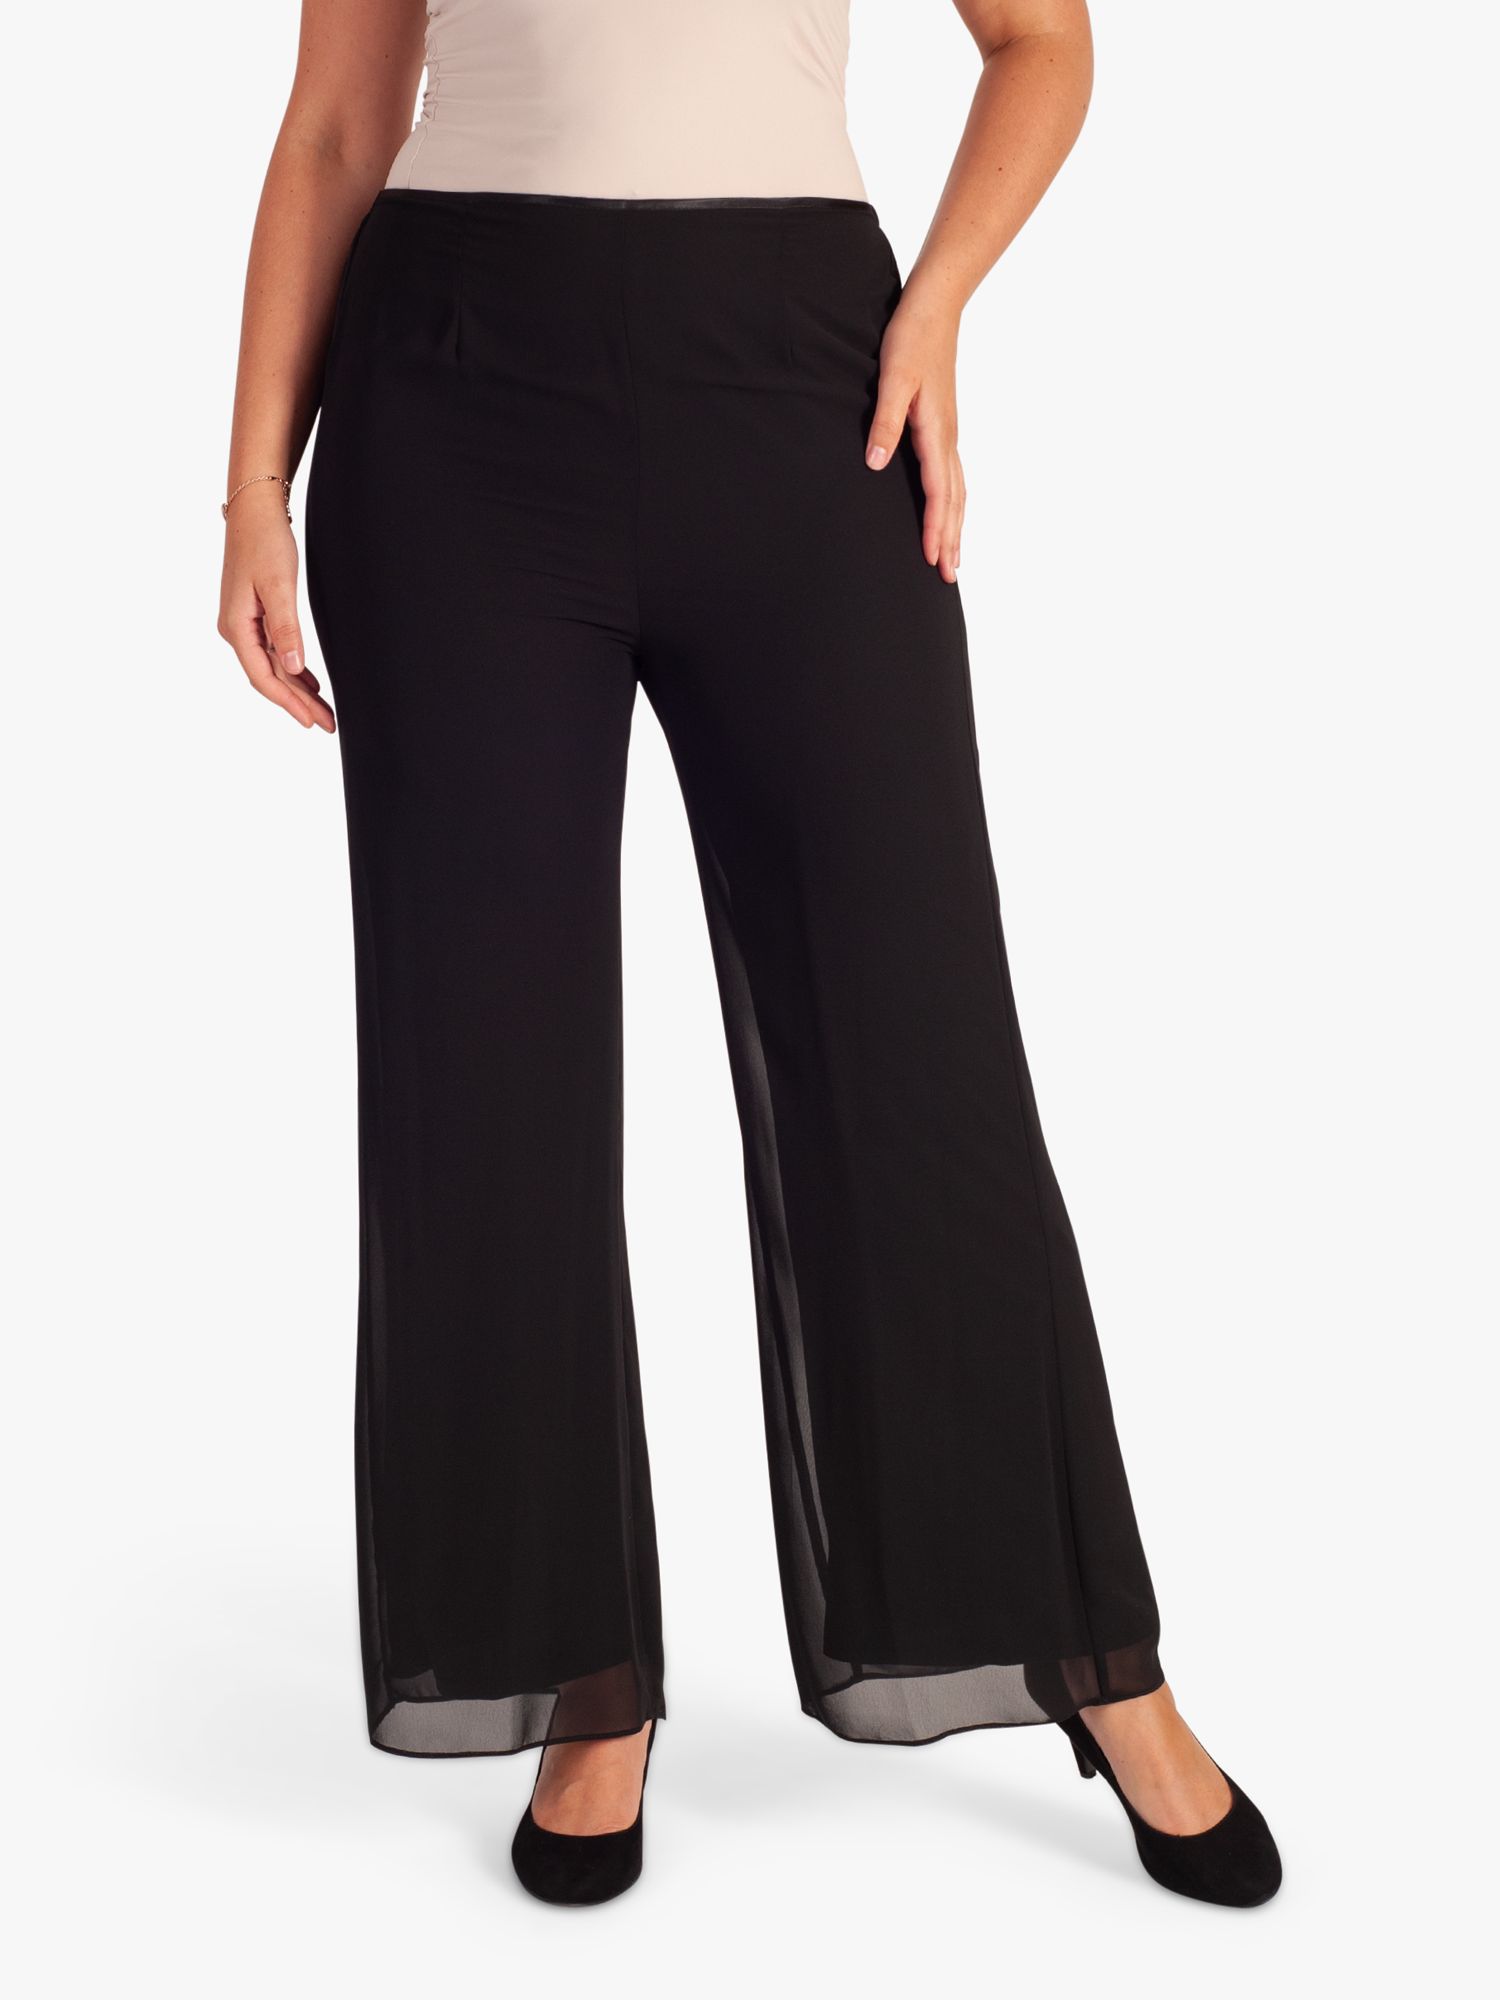 Chesca Jersey Lined Chiffon Trousers